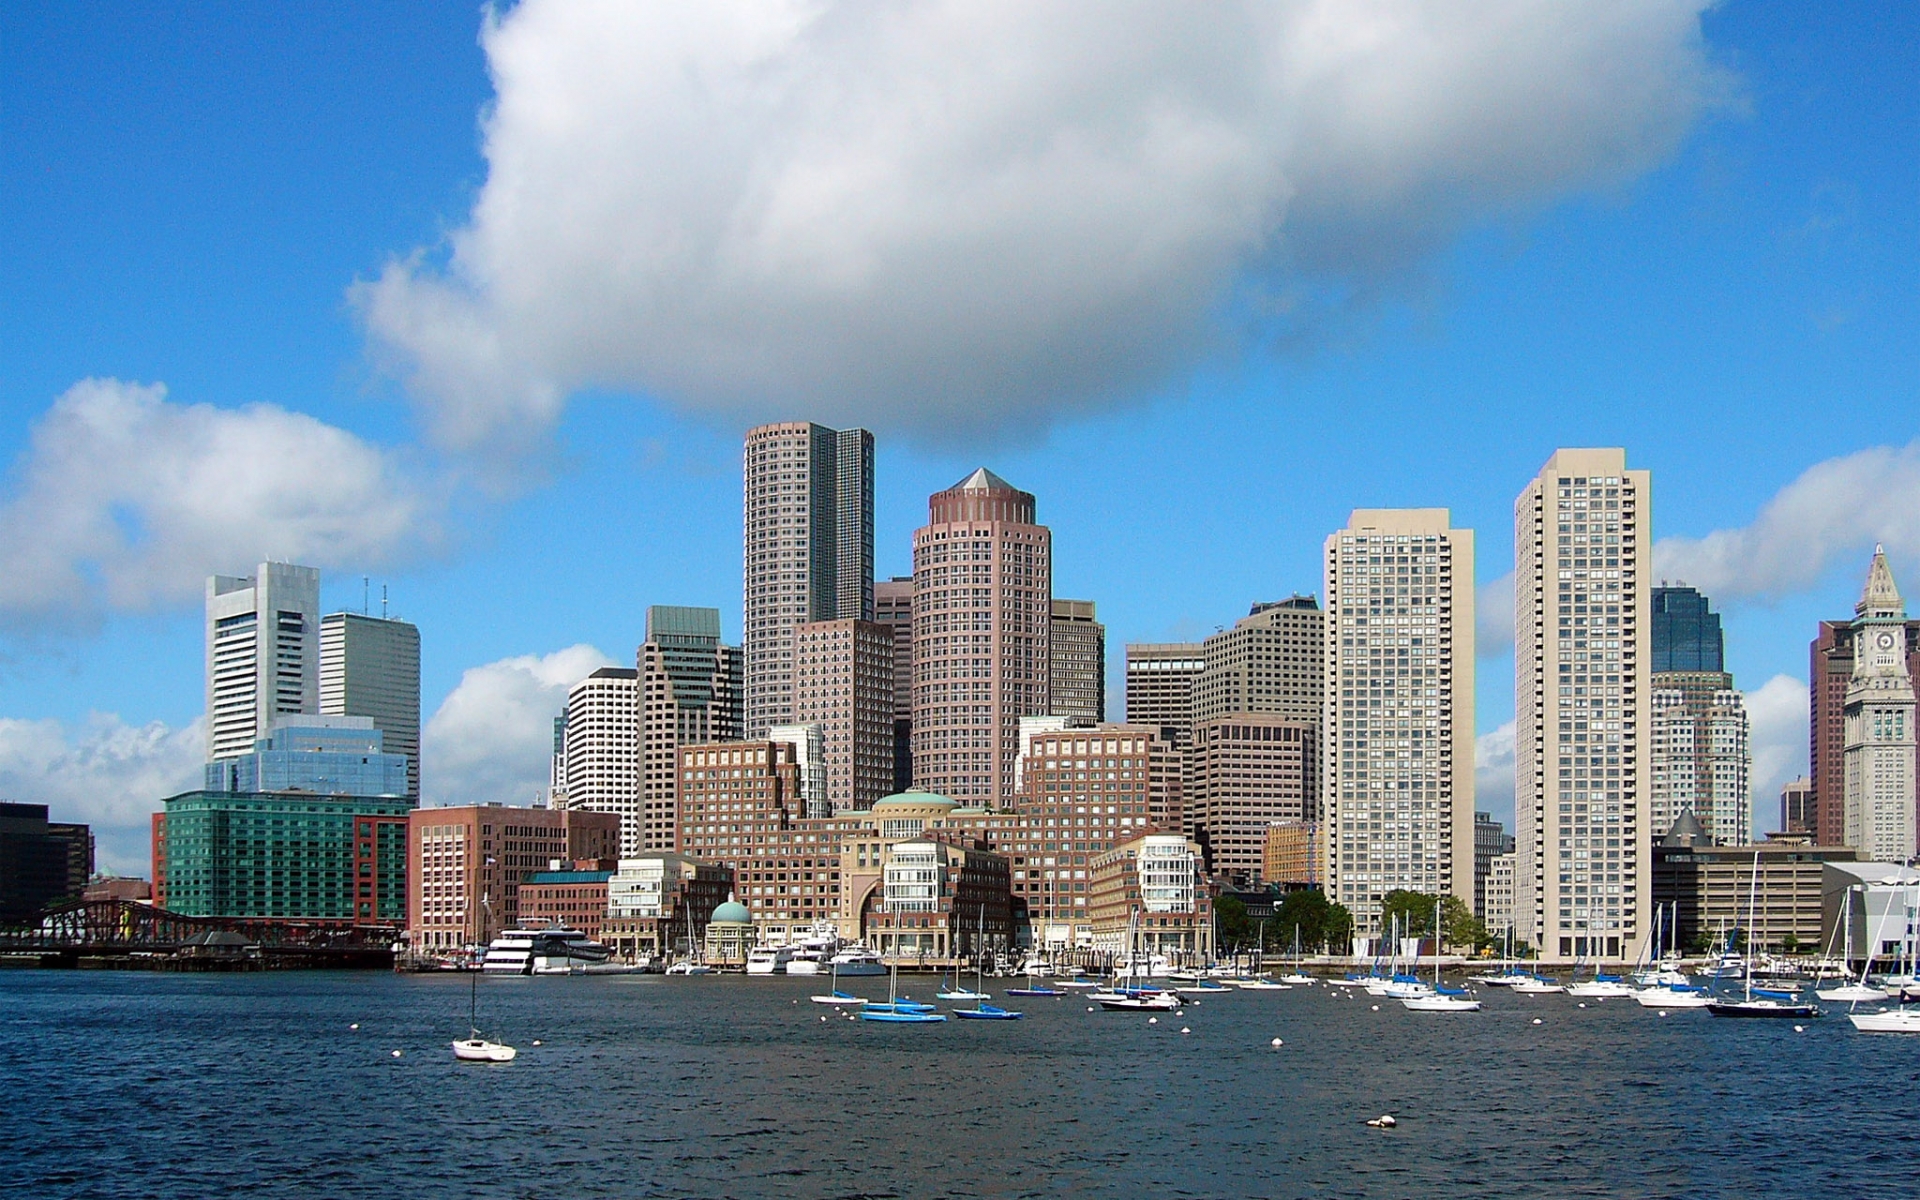 Boston HD Wallpaper Cool Awesome City High Quality